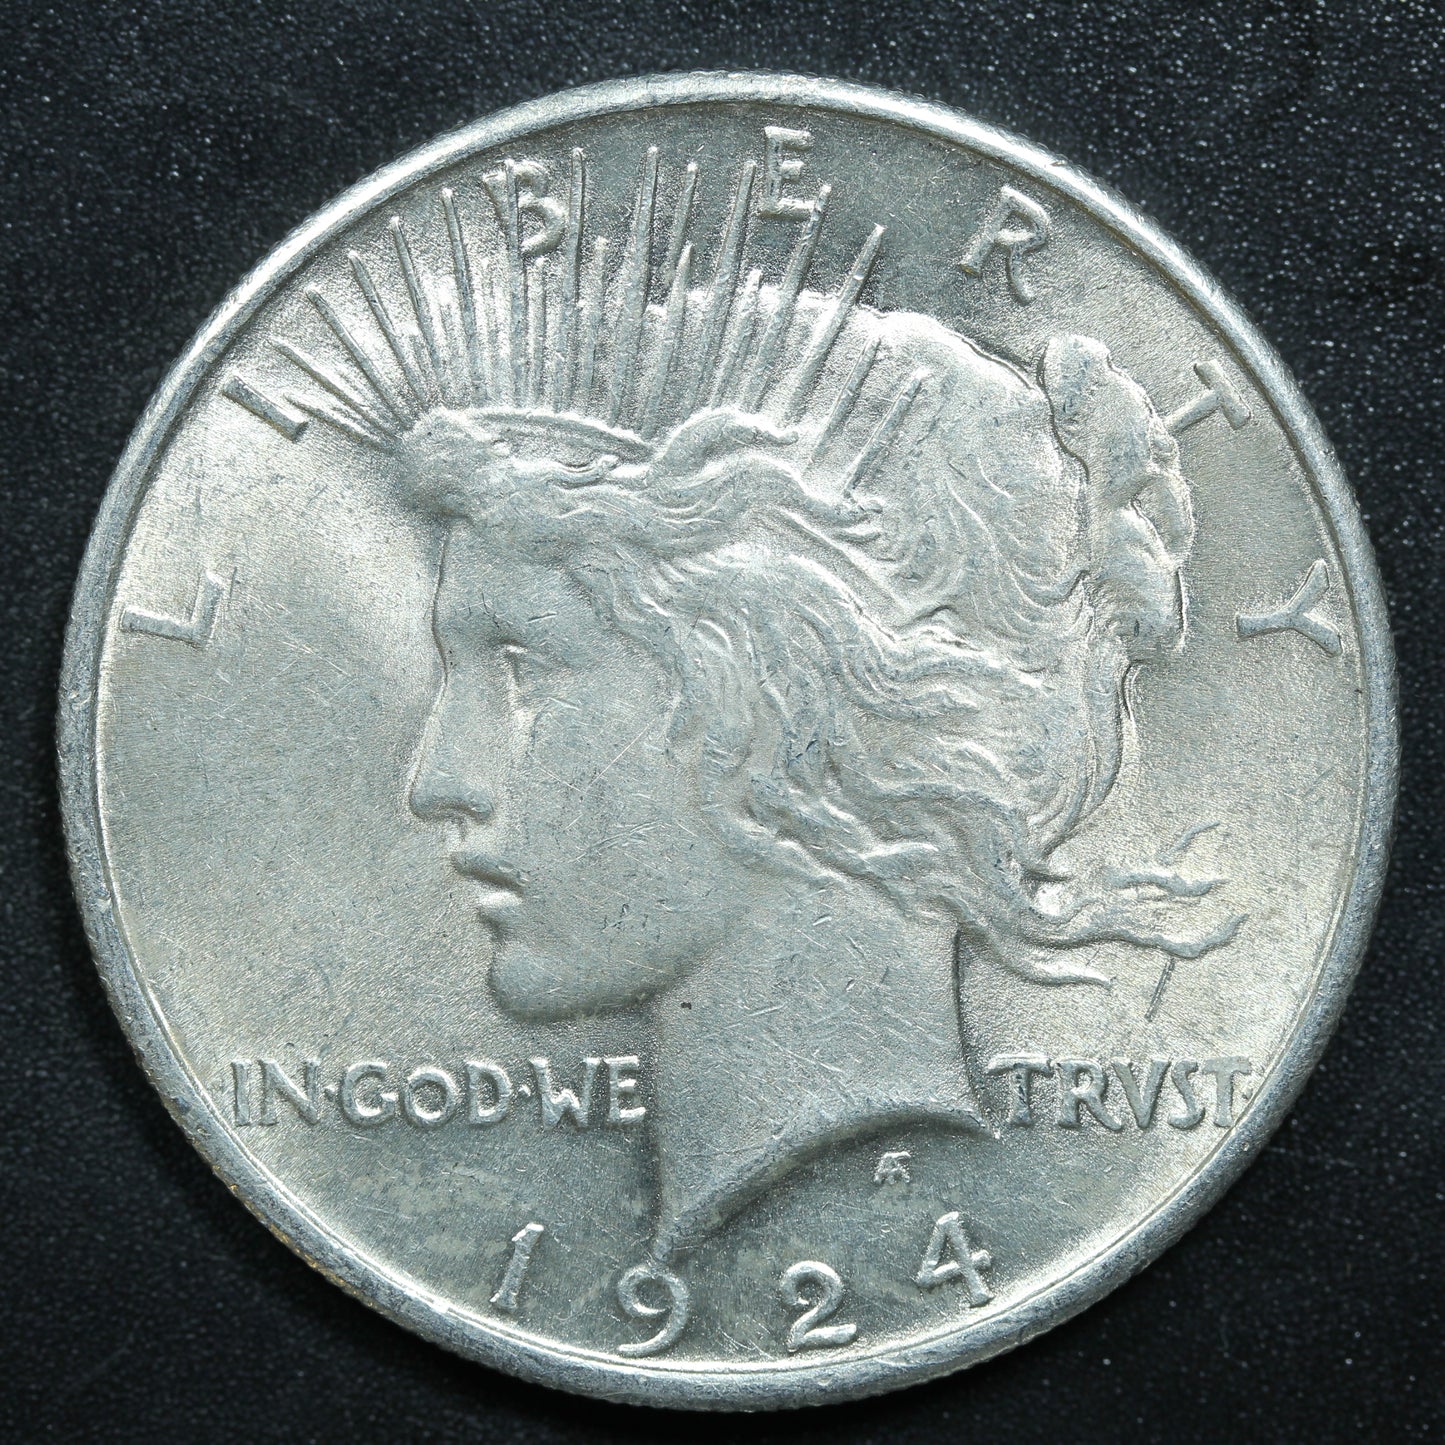 1924 Peace Dollar - Silver - Philadelphia - Exact Coin Pictured